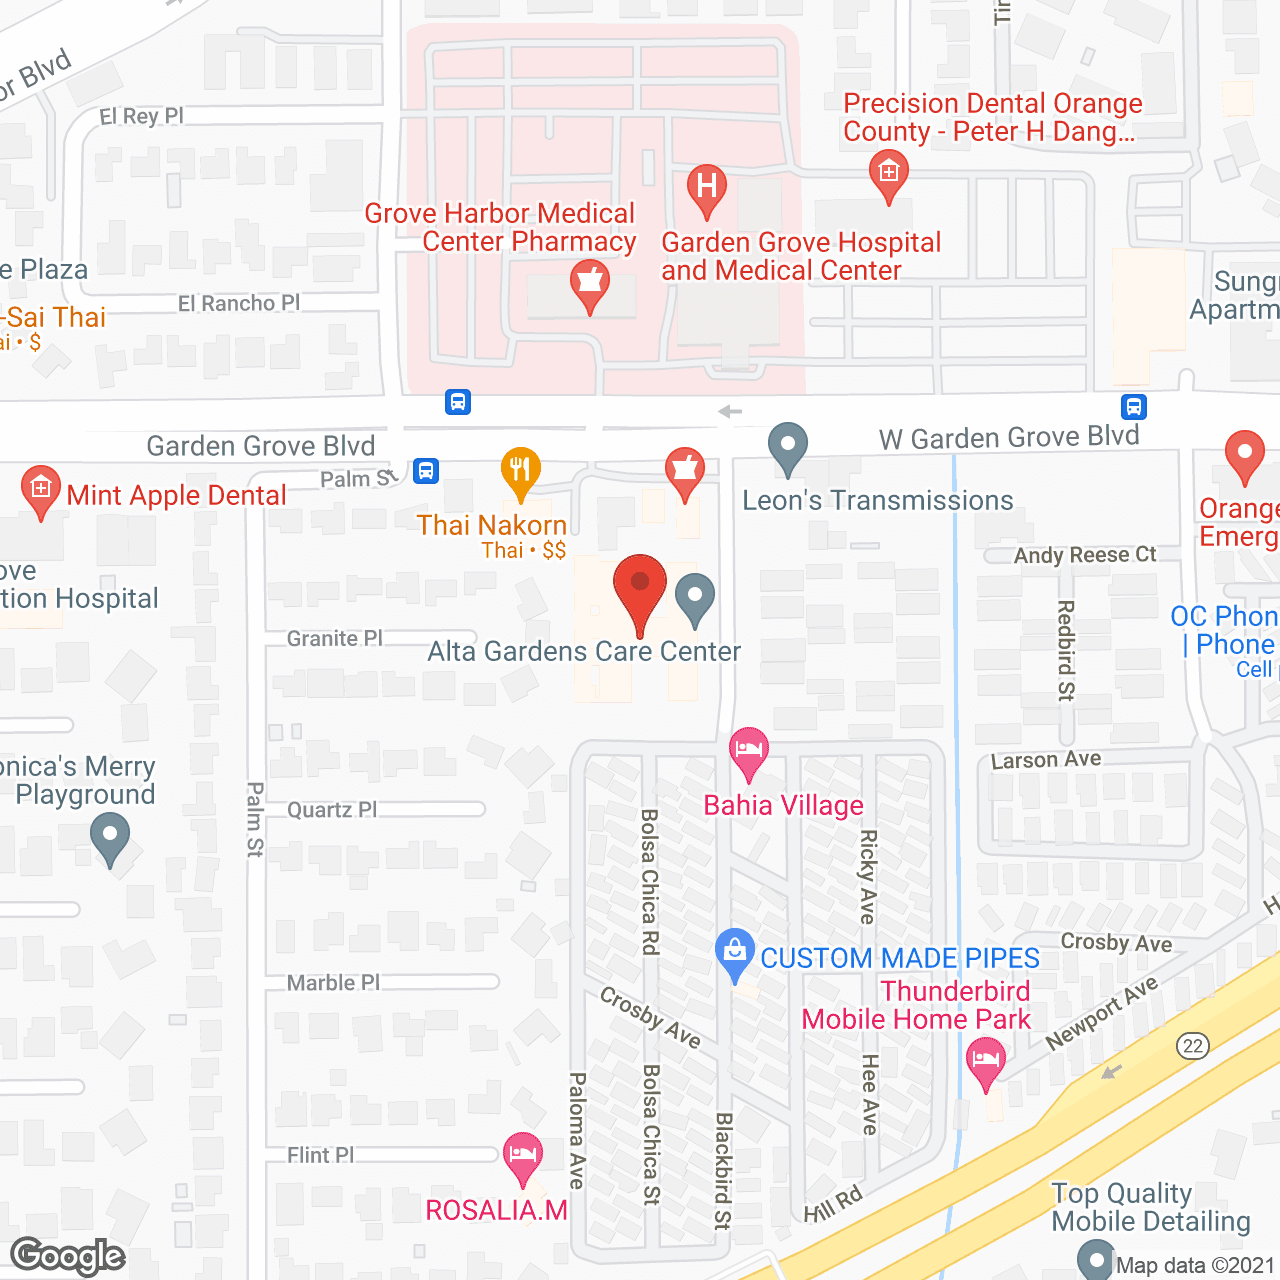 Palm Grove Care Ctr in google map